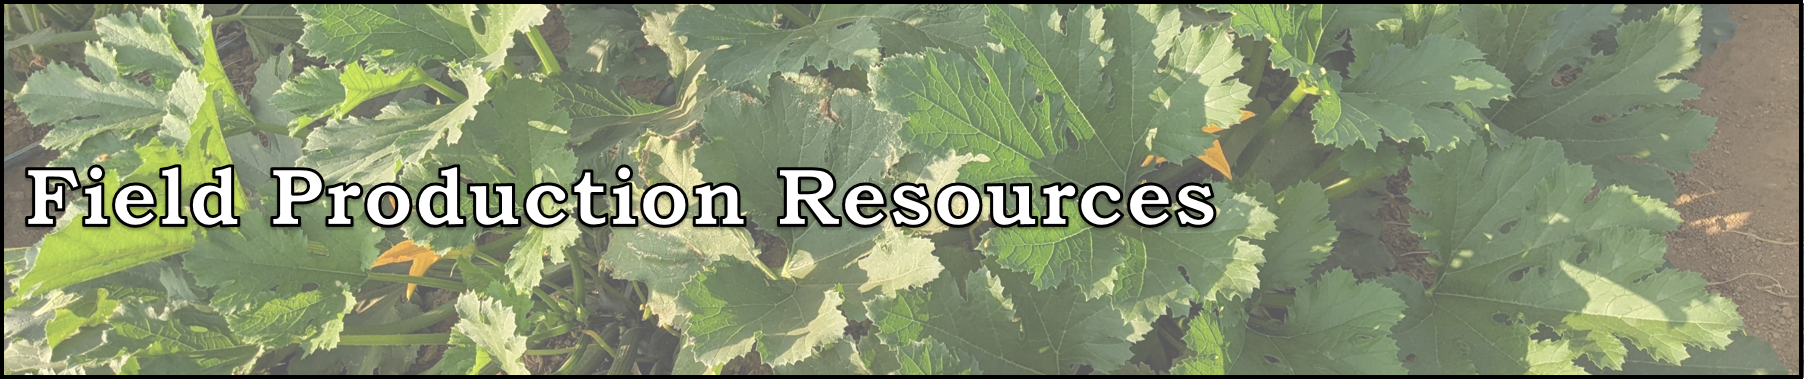 Field Production Resources